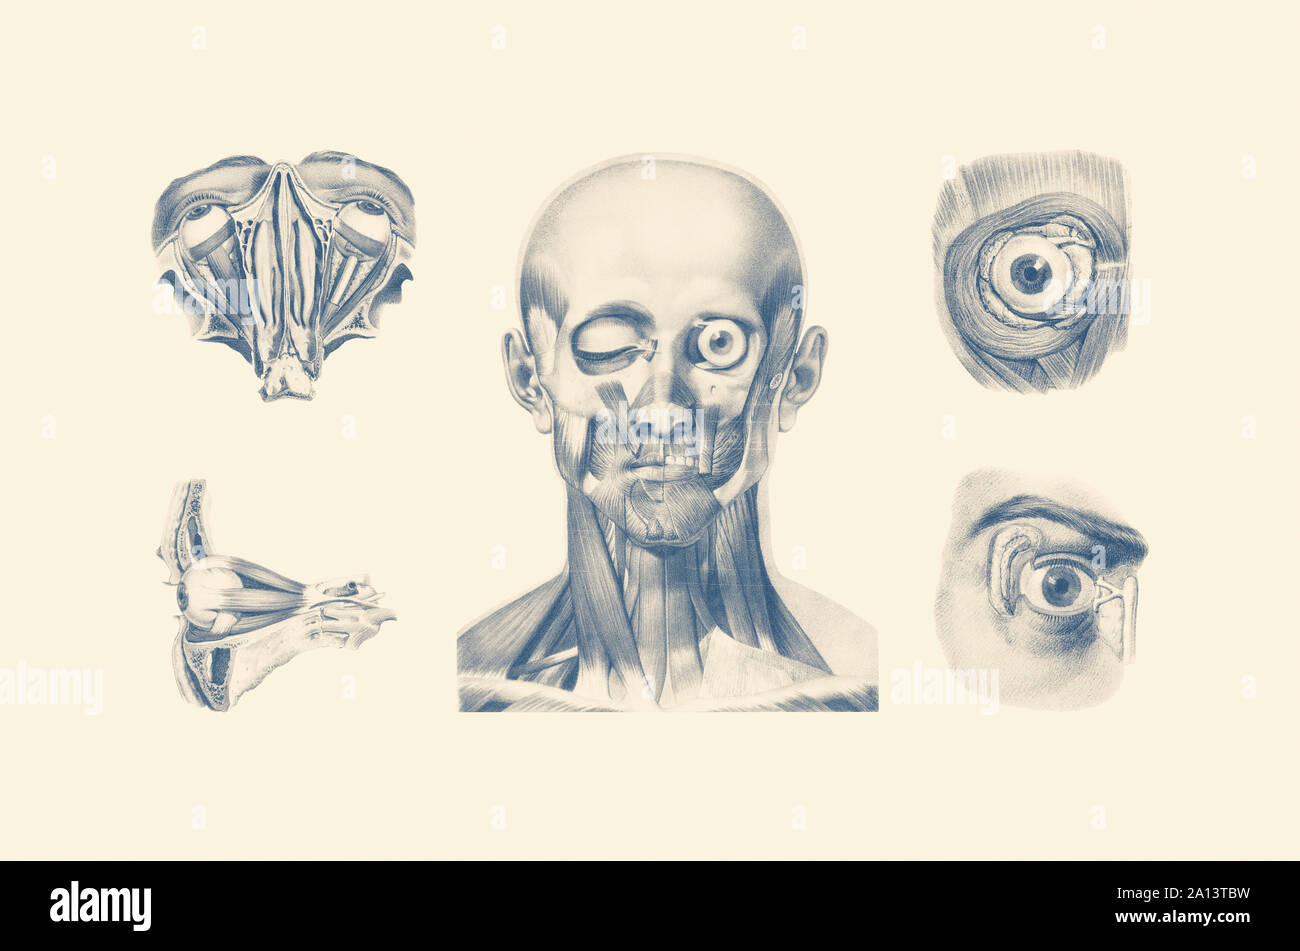 Vintage anatomy print showing multiple views of the human face and eyes. Stock Photo